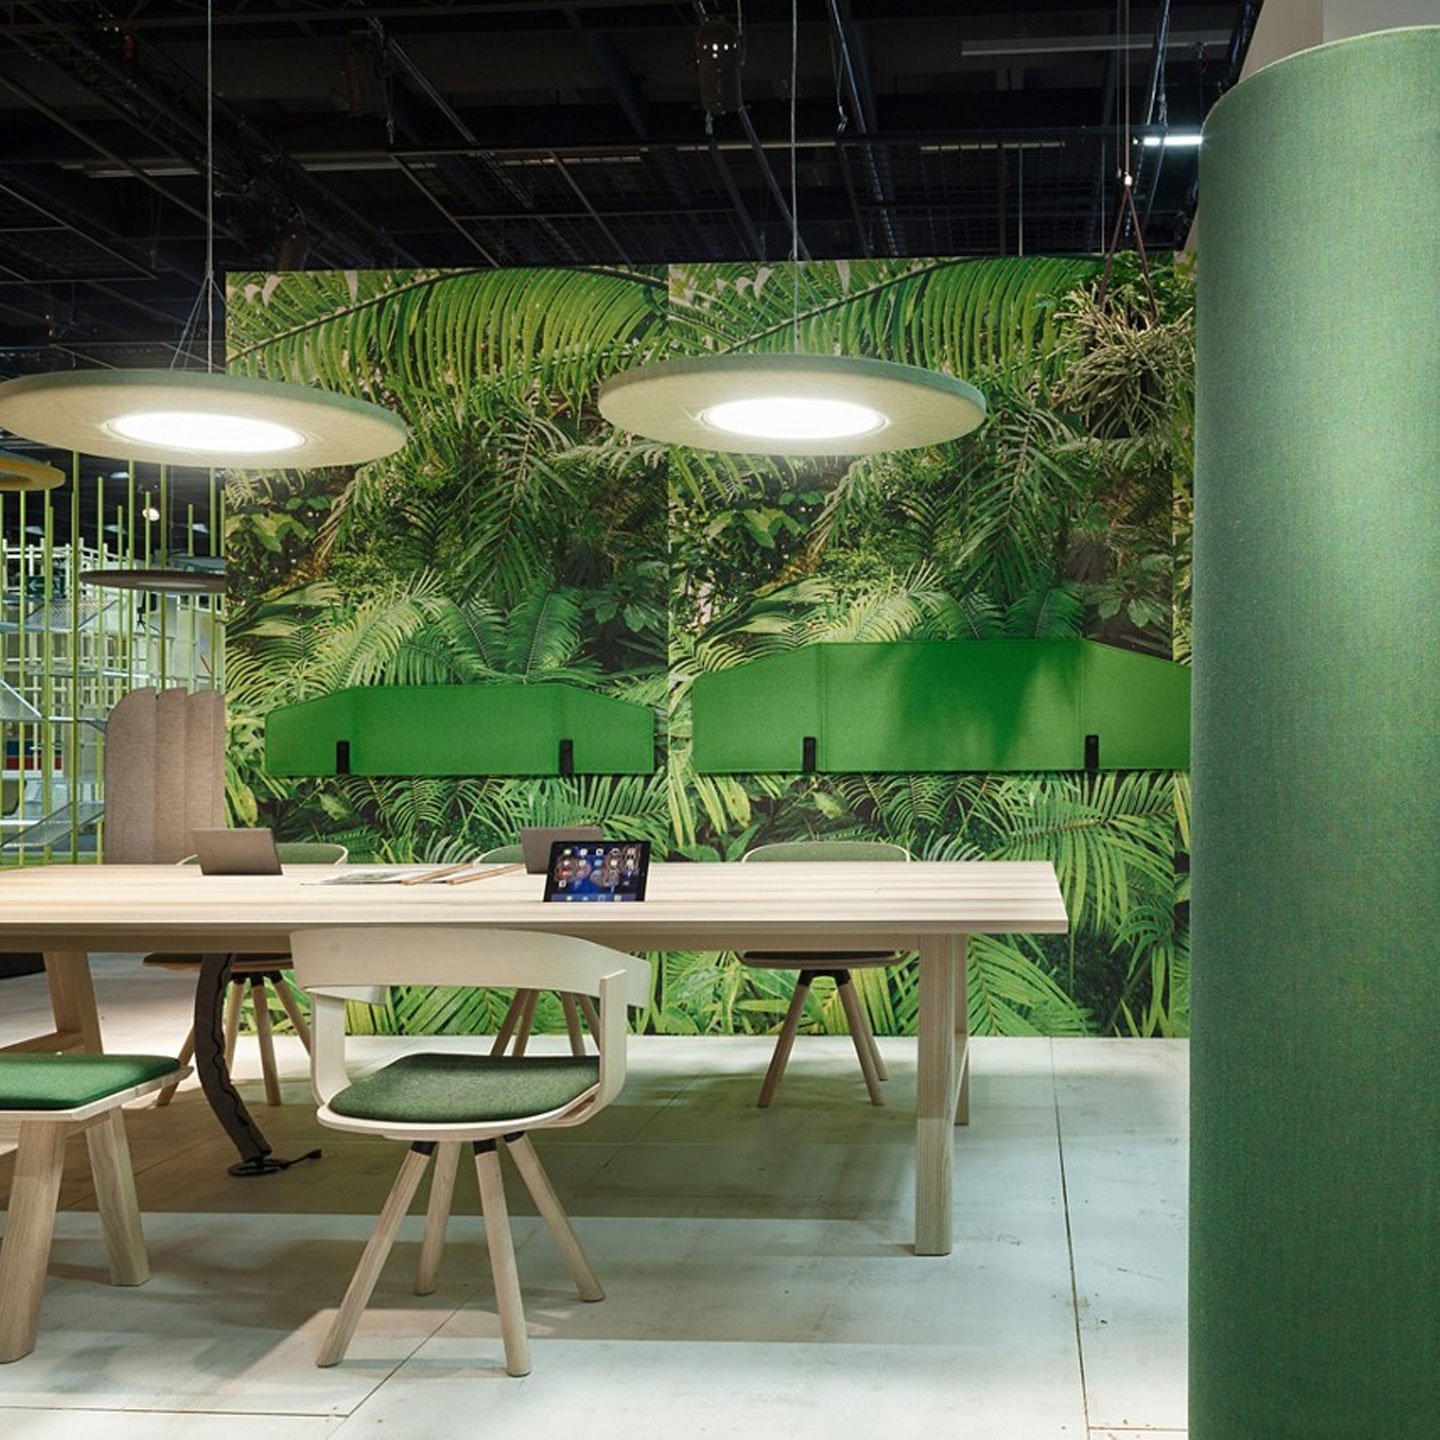 Haworth BuzziSkin Accessories Wallpaper with jungle fern design in a open office area with green chairs